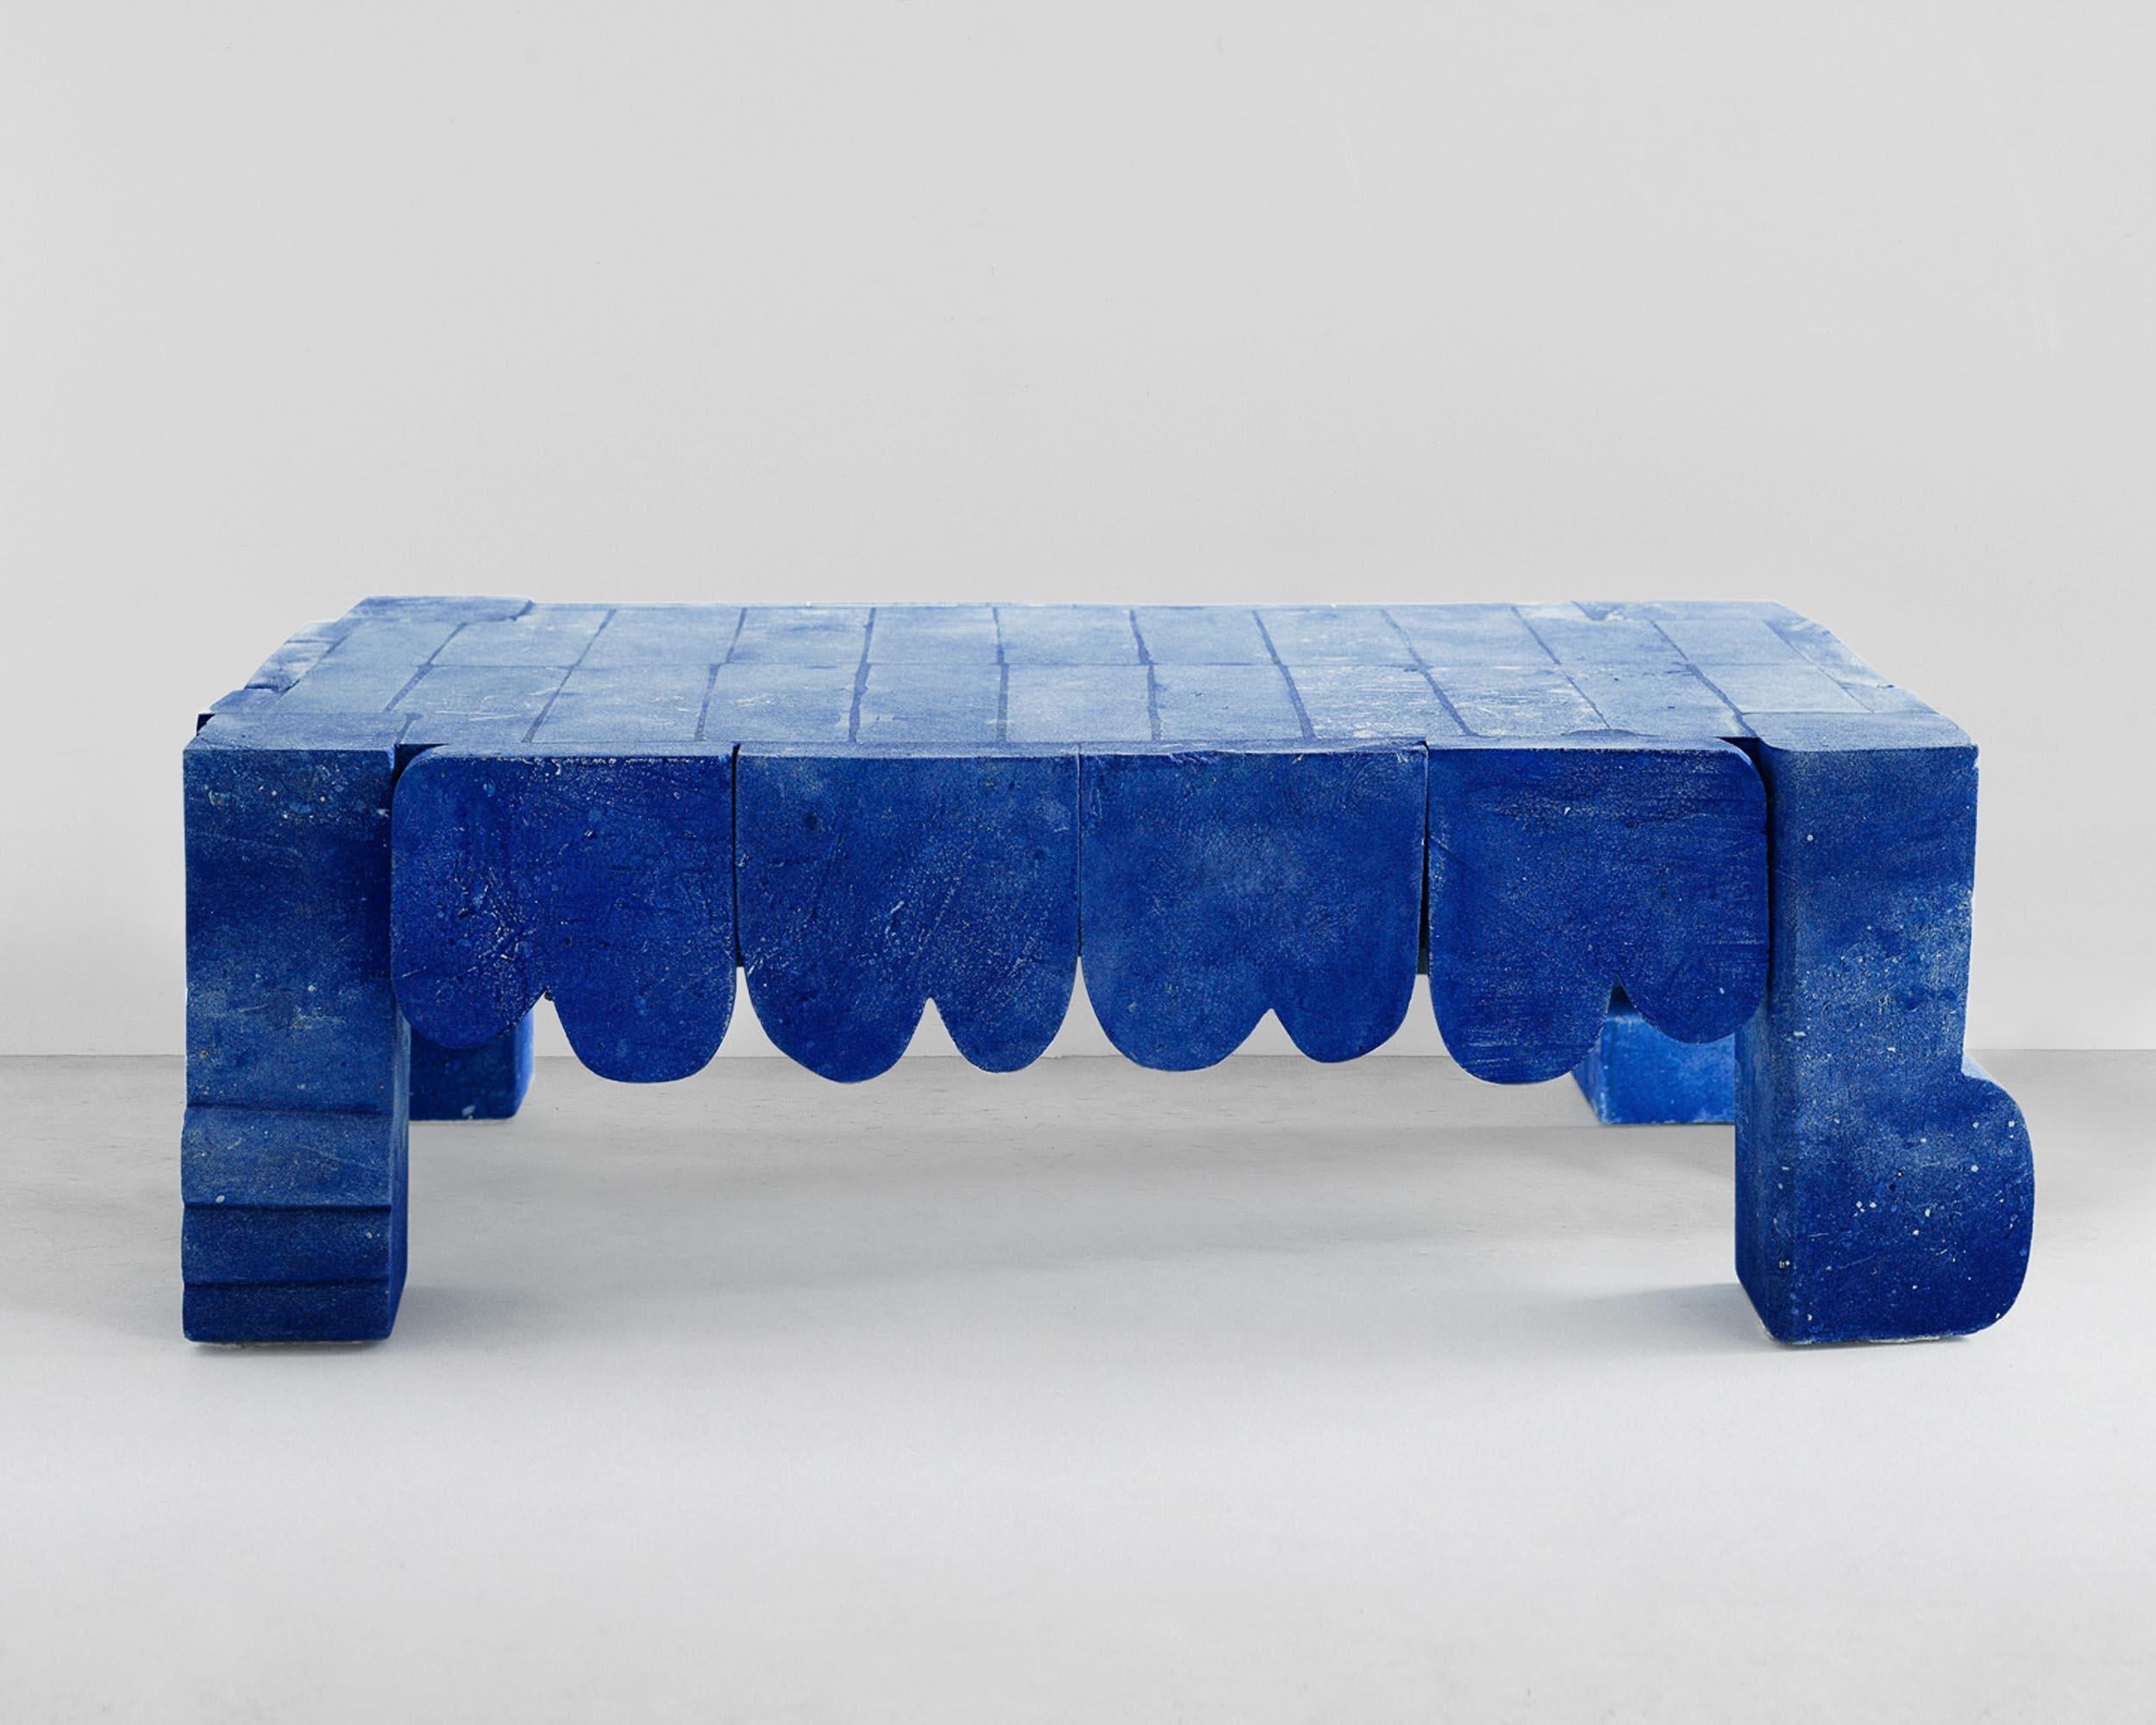 Contemporary coffee table 'Bobster' by denHolm.

Each creation is unique and signed by the artist.

Dimensions:
H. 36 cm
L. 68 cm
W. 105 cm

Material:
South Australian Limestone, sculpted entirely by hand.
---
Artist and stonemason Steve Clark is